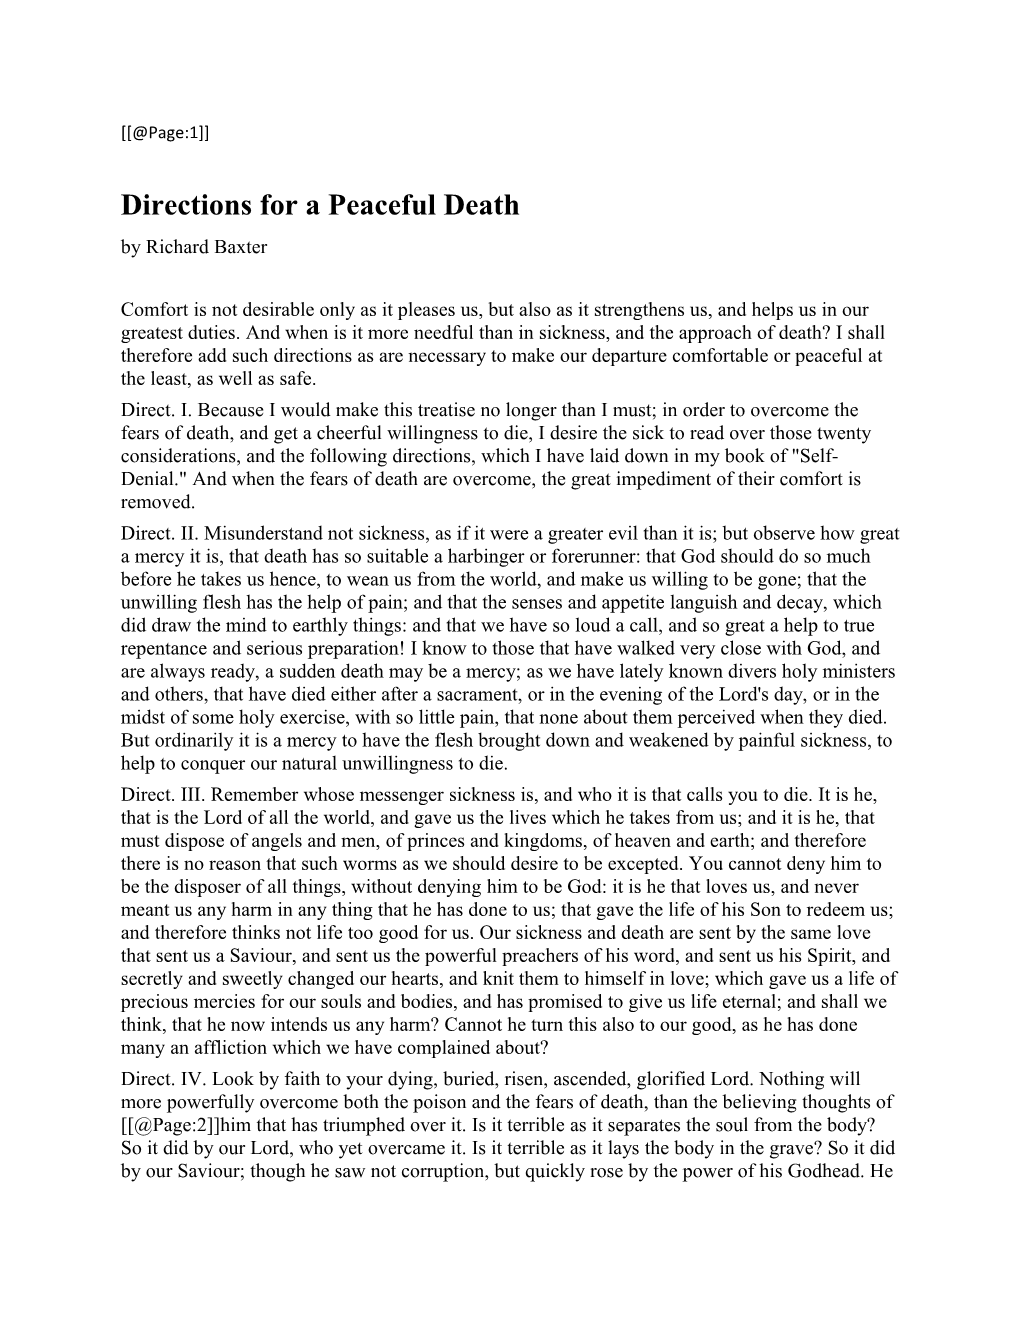 Directions for a Peaceful Death